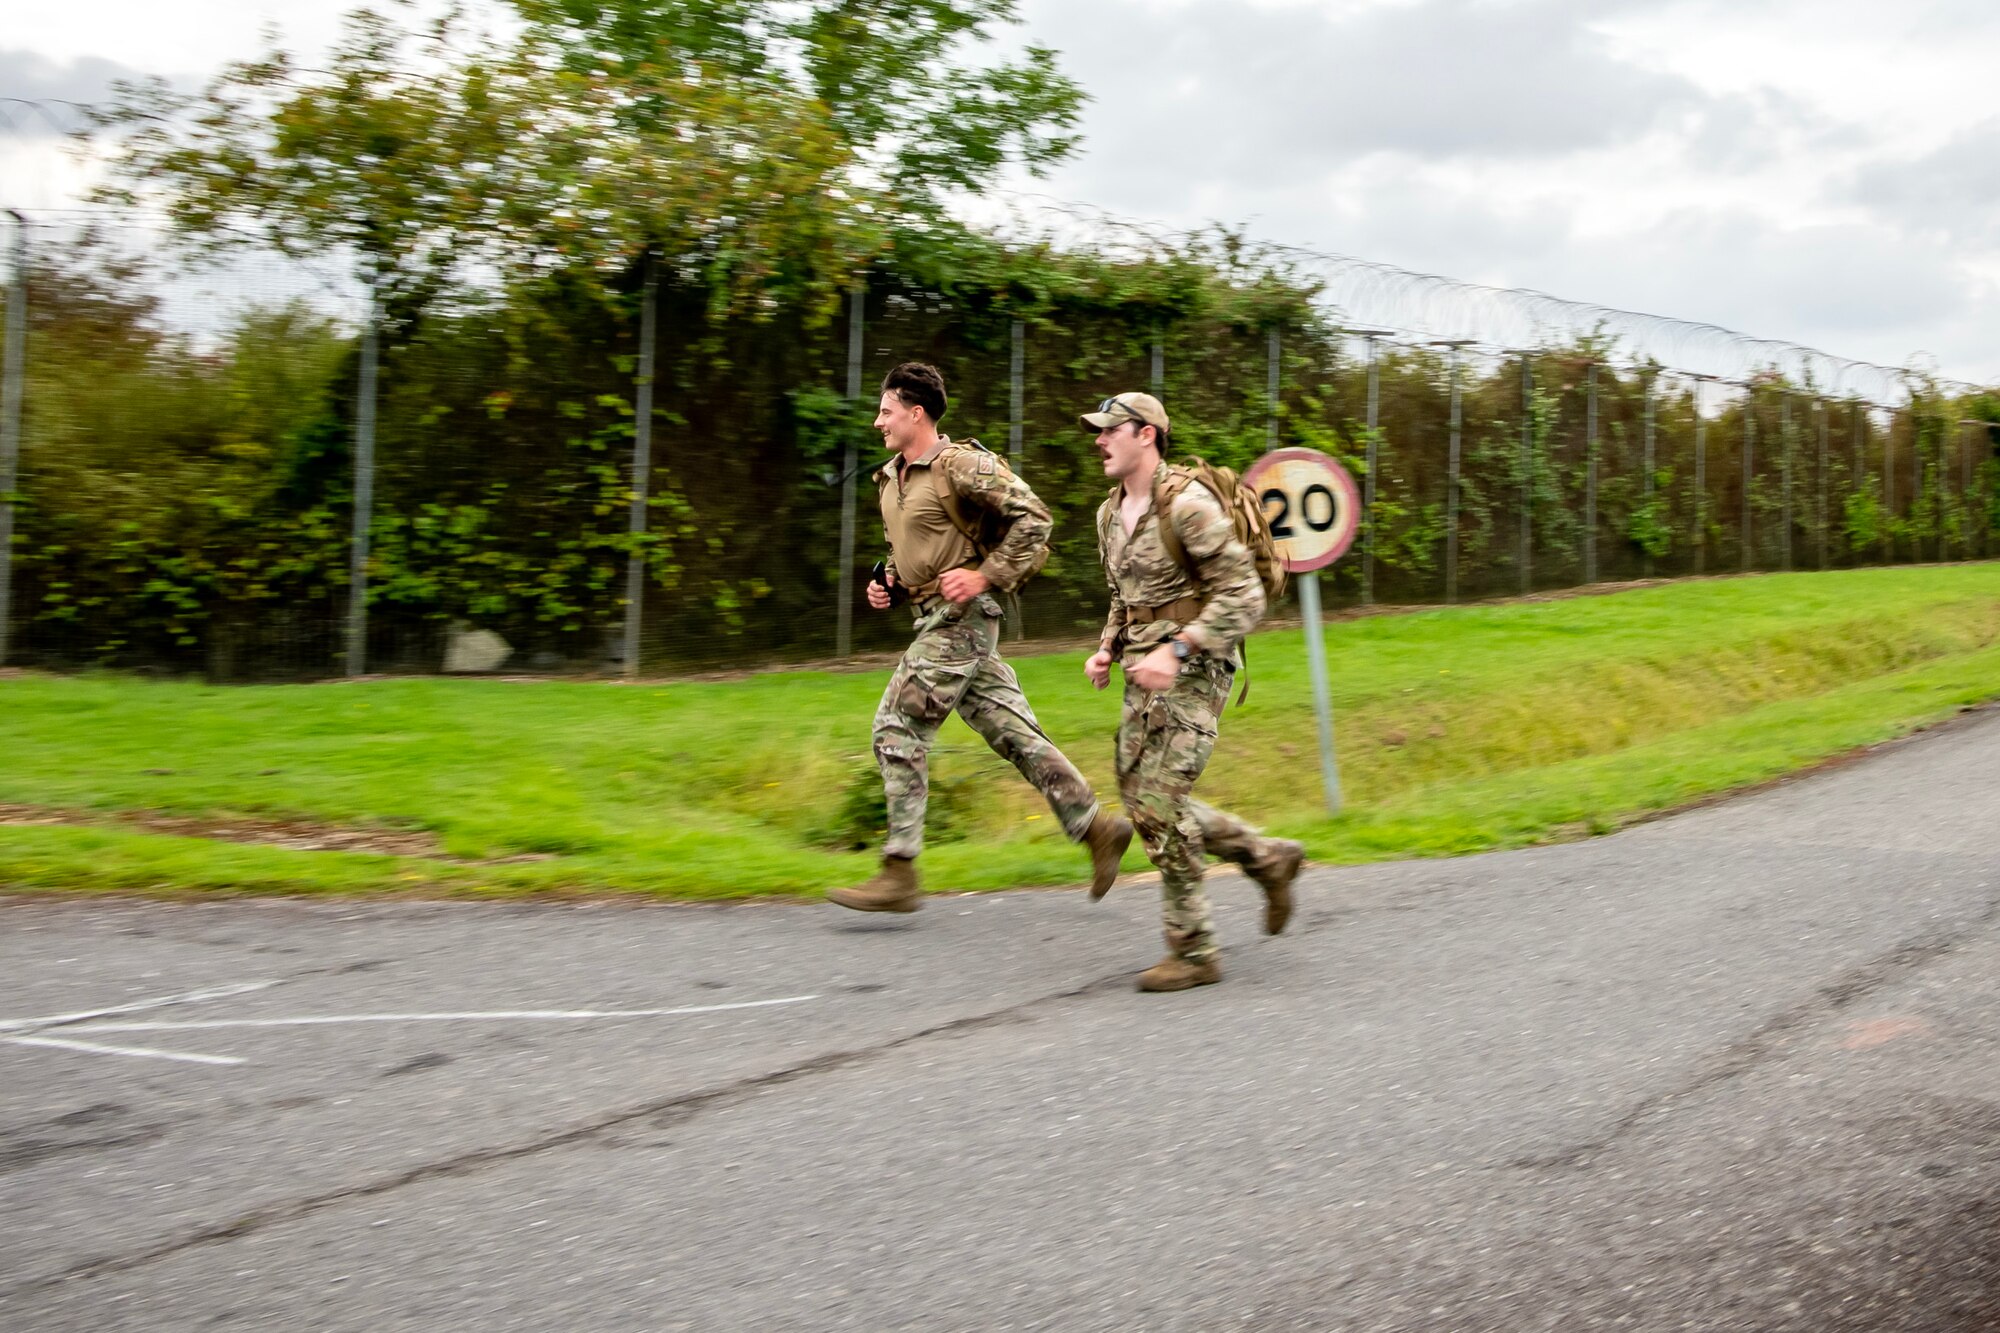 Participants complete a ruck march at RAF Molesworth, England, Aug. 18, 2023. Over 100 personnel from the 501st CSW and mission partner units participated in a 25 Kilometer Danish Contingent ruck march, which allowed them to test their physical capabilities and encouraged social bonds between joint forces. The DANCON ruck march has been completed in numerous countries throughout the world since it was established in 1972. (U.S. Air Force photo by Staff Sgt. Eugene Oliver)